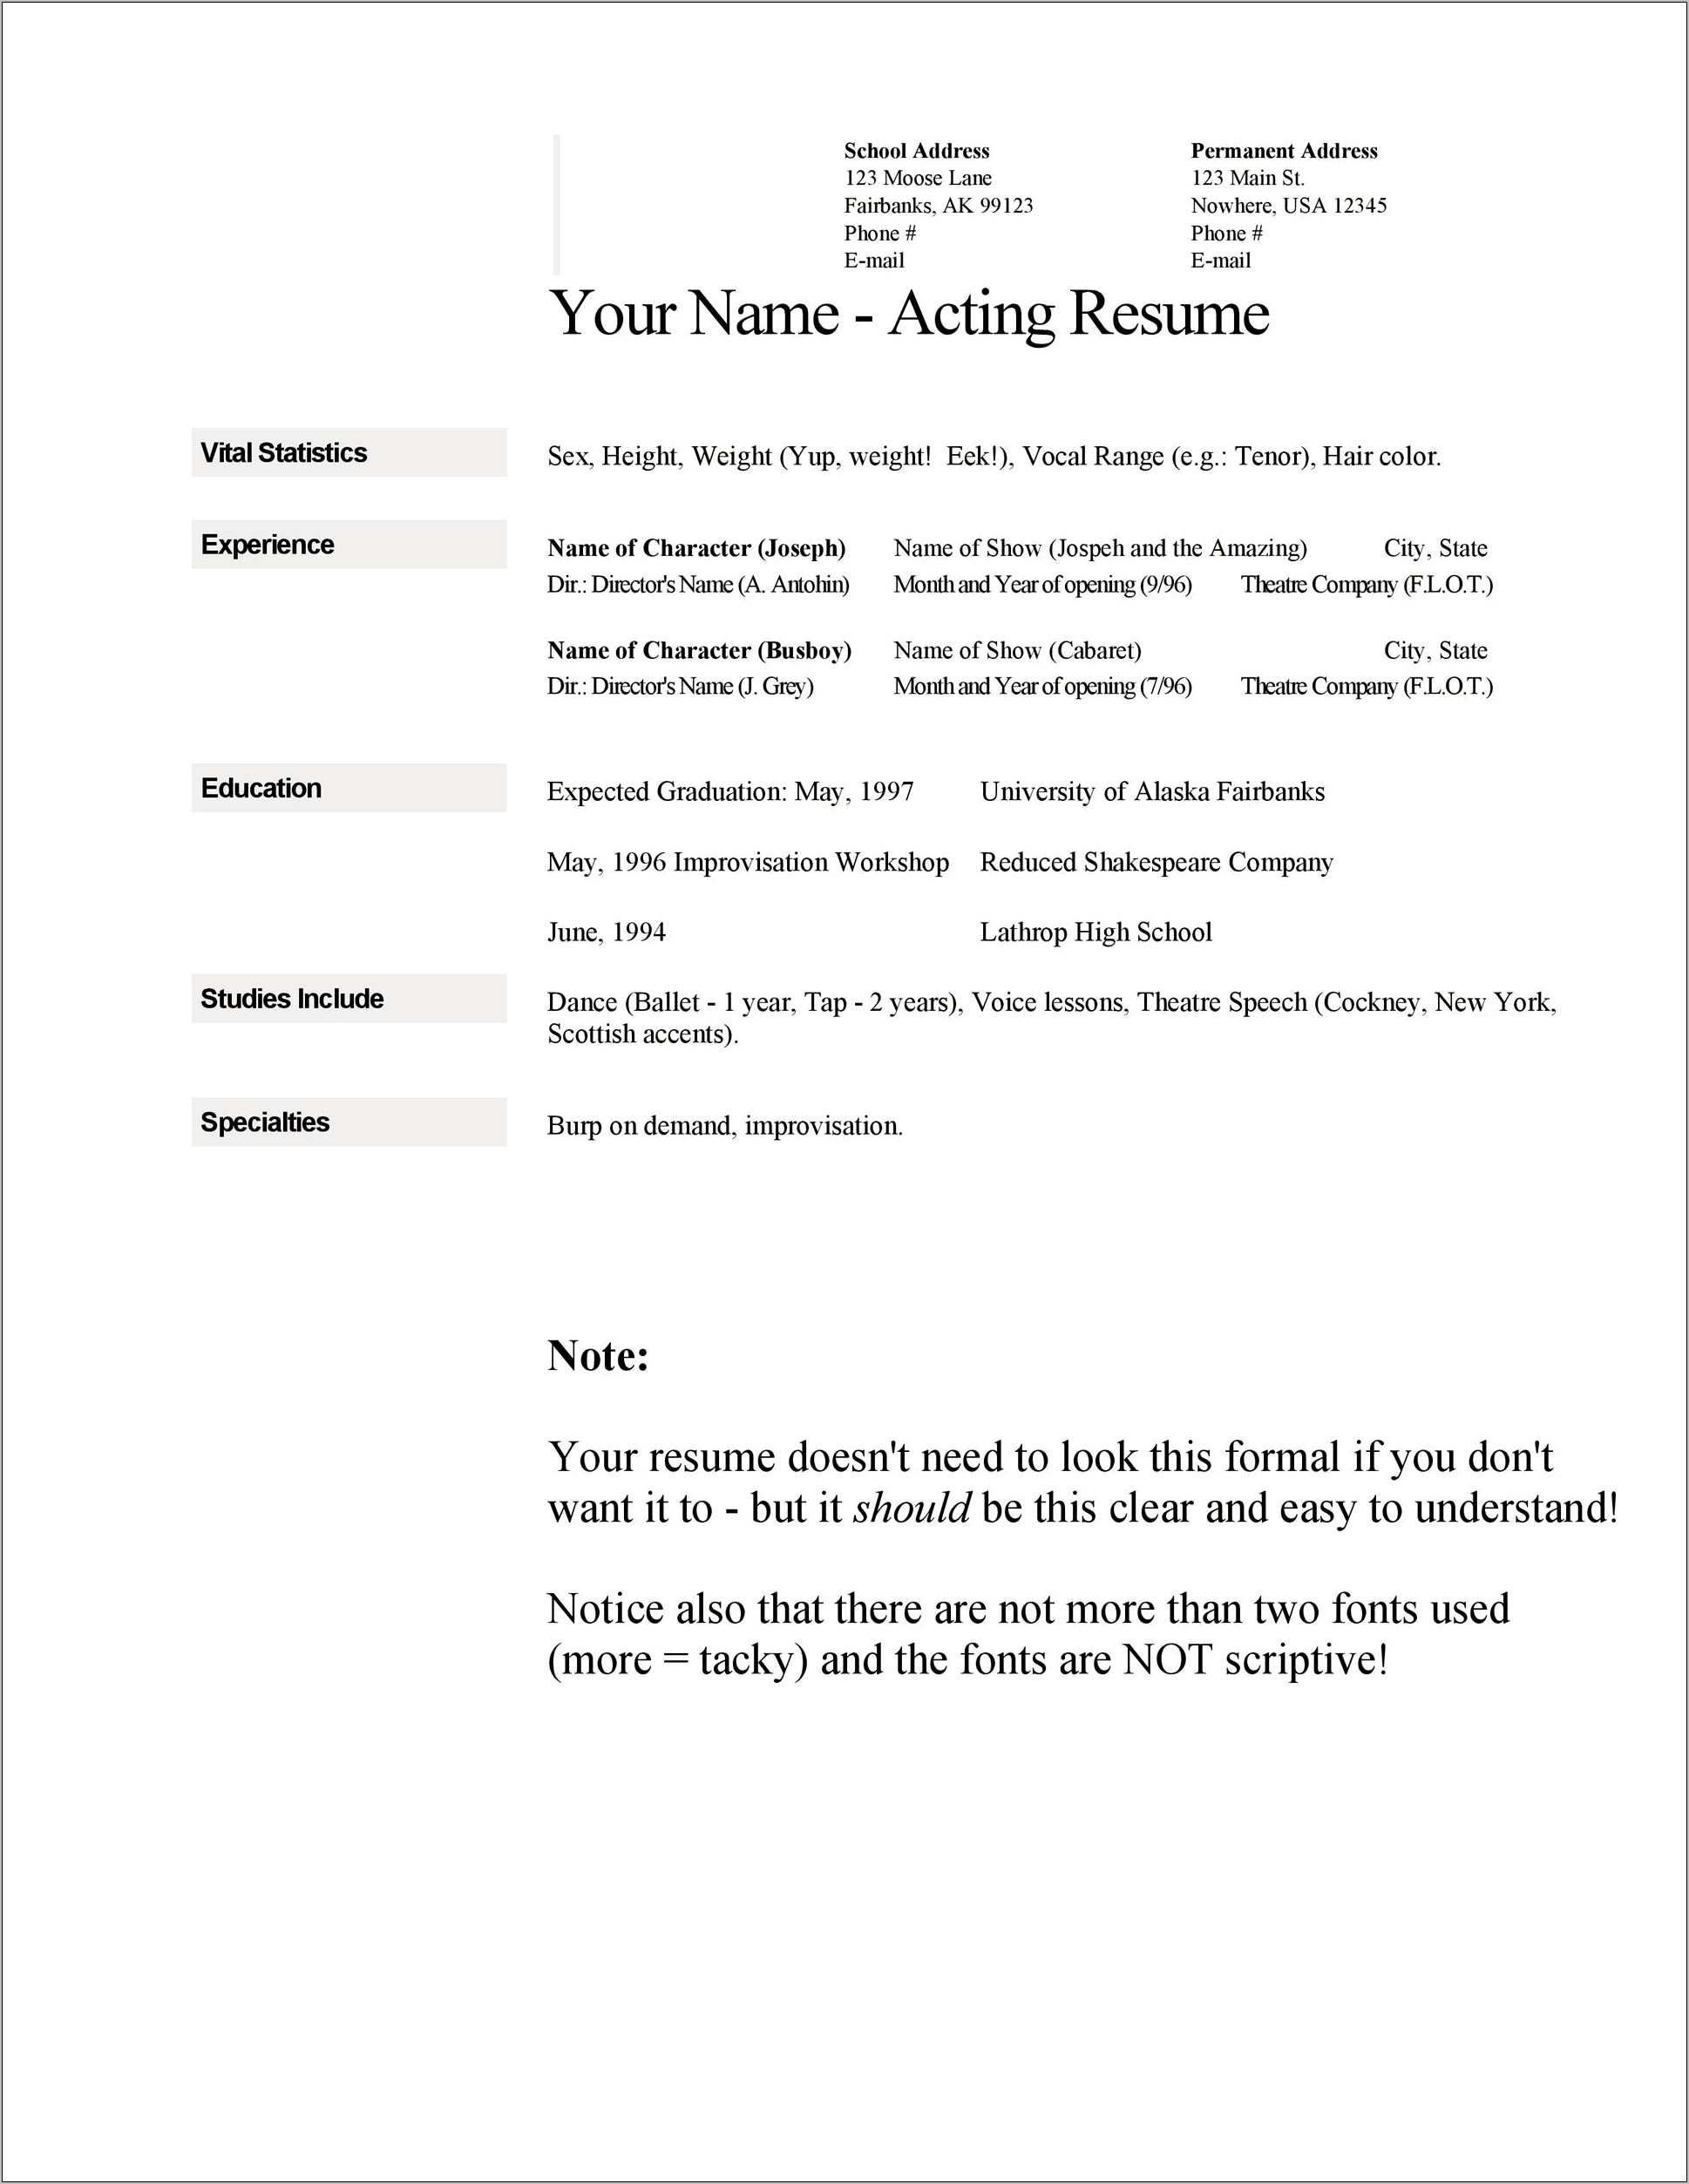 Resume Samples For A 16 Year Old